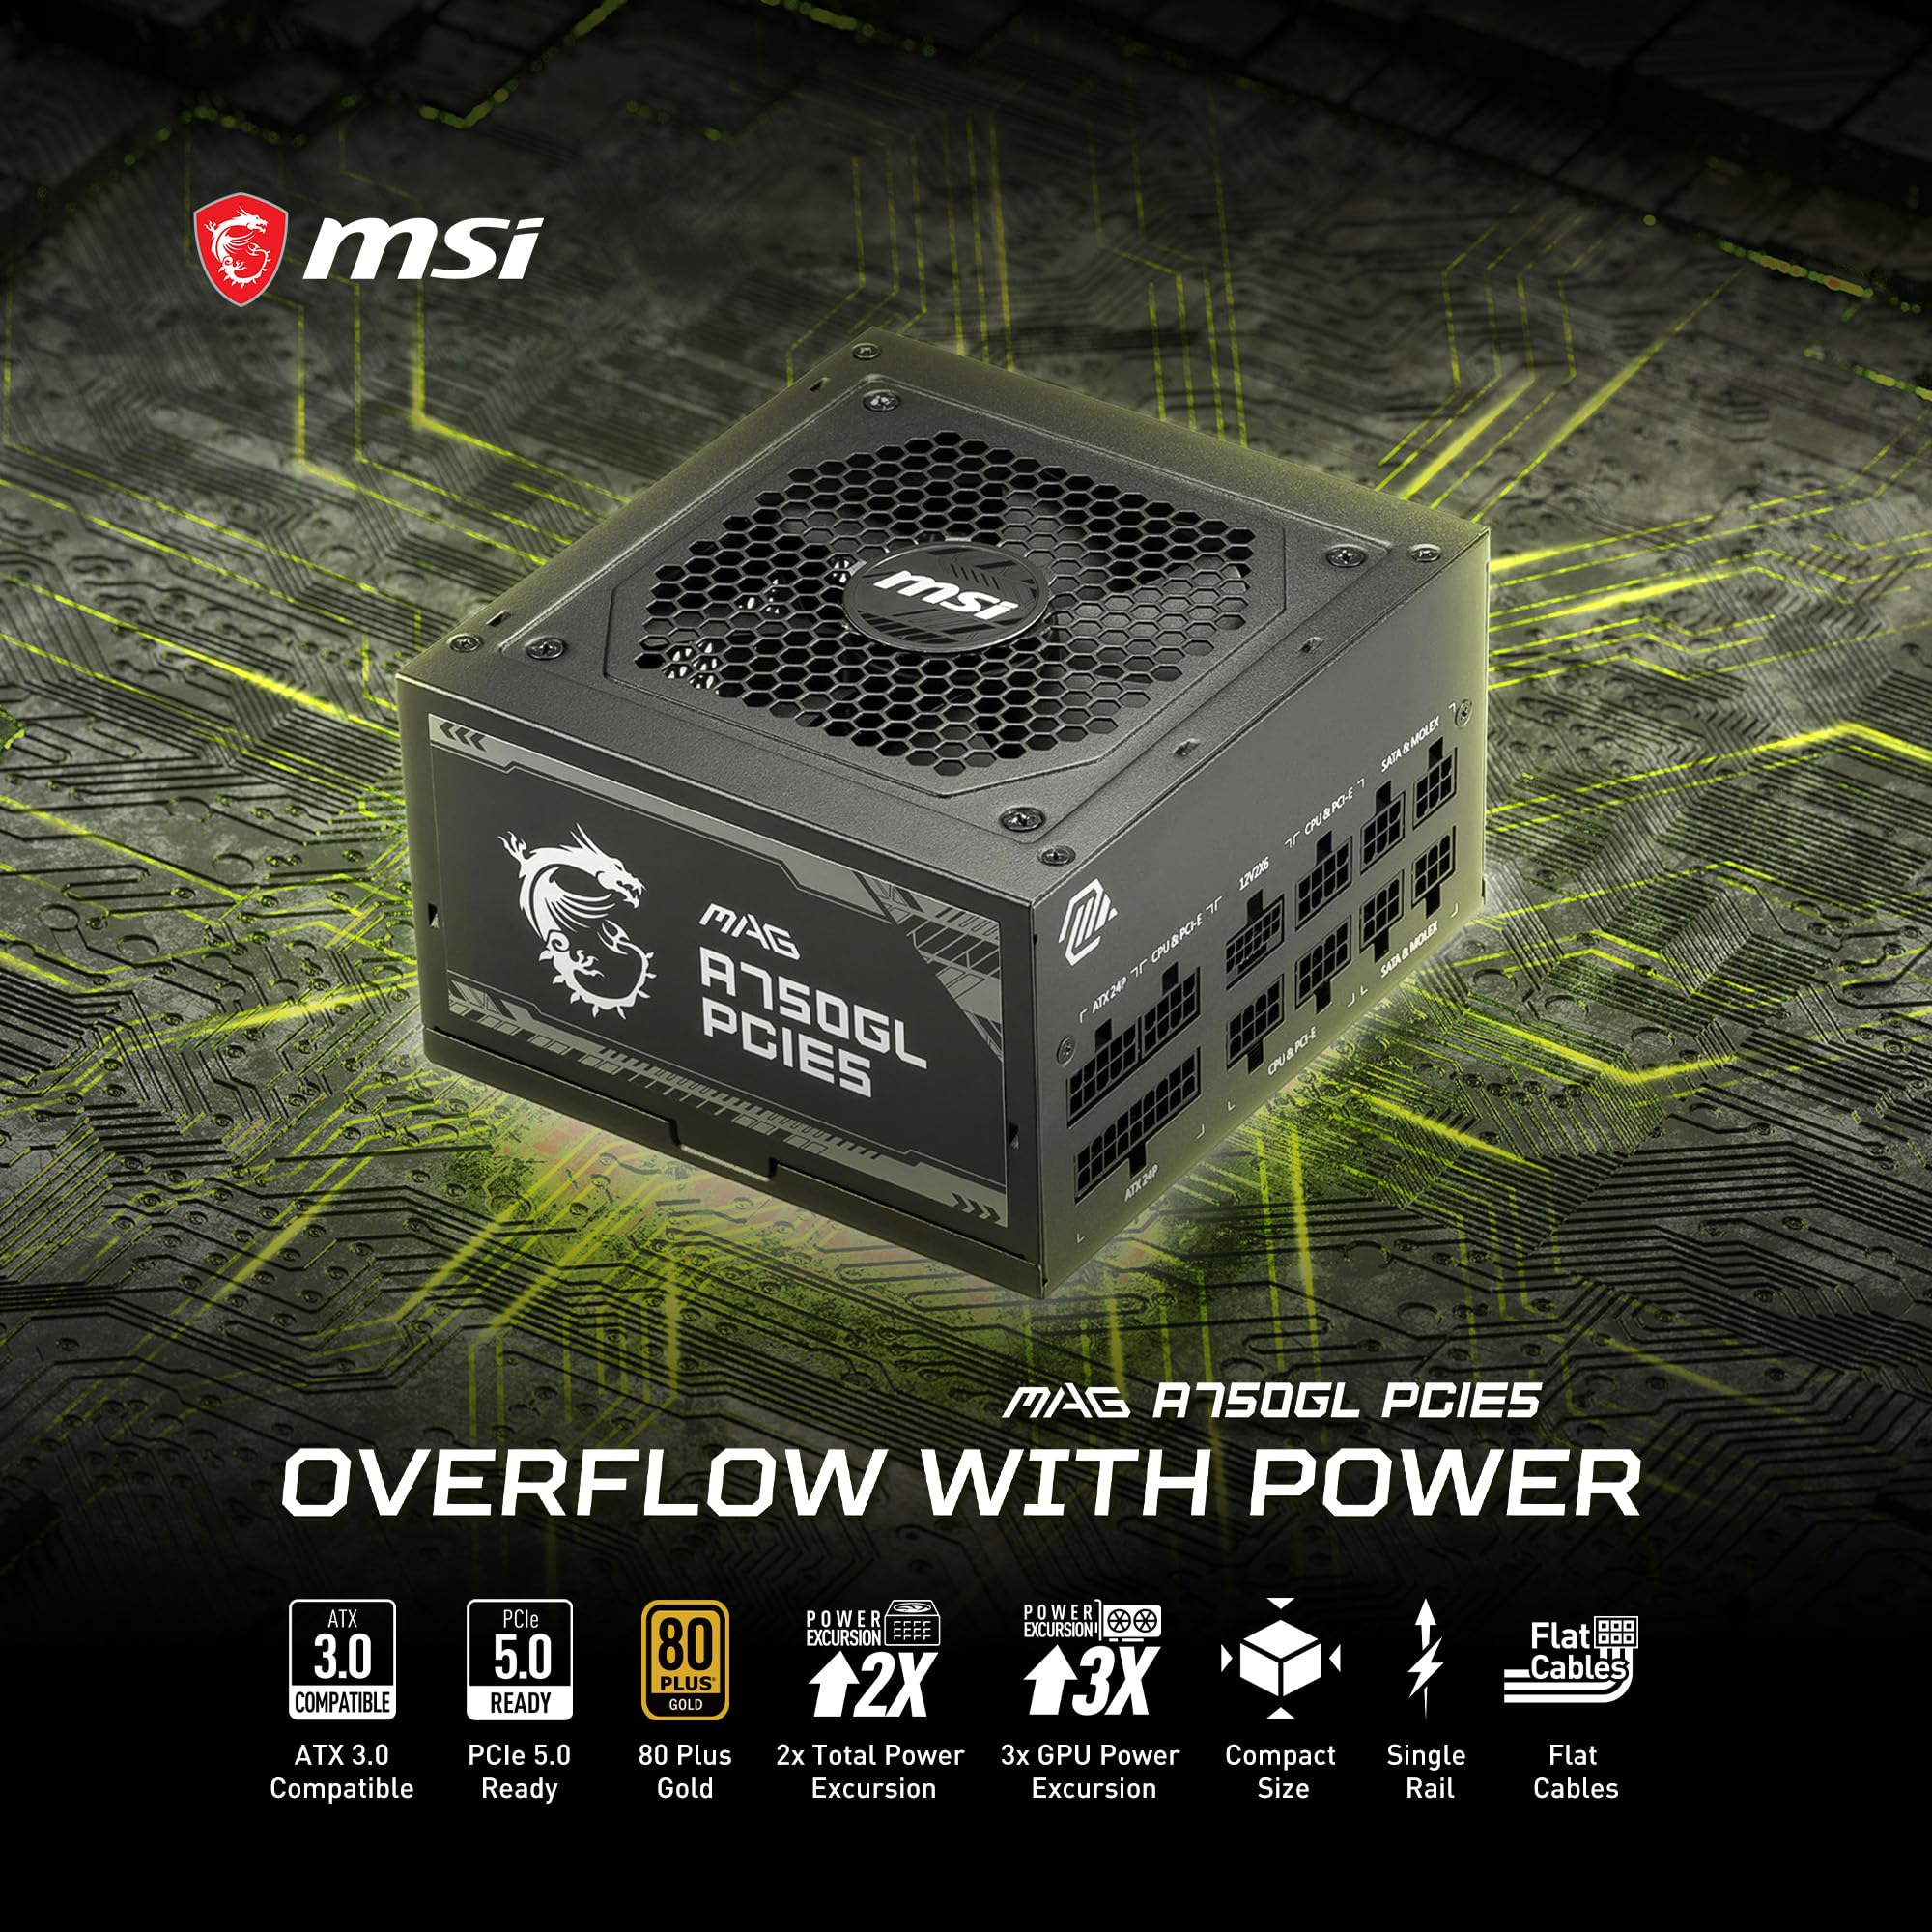 MSI MAG A750GL PCIE 5 & ATX 3.0 Gaming Power Supply - Full Modular - 80 Plus Gold Certified 750W - Compact Size - ATX PSU